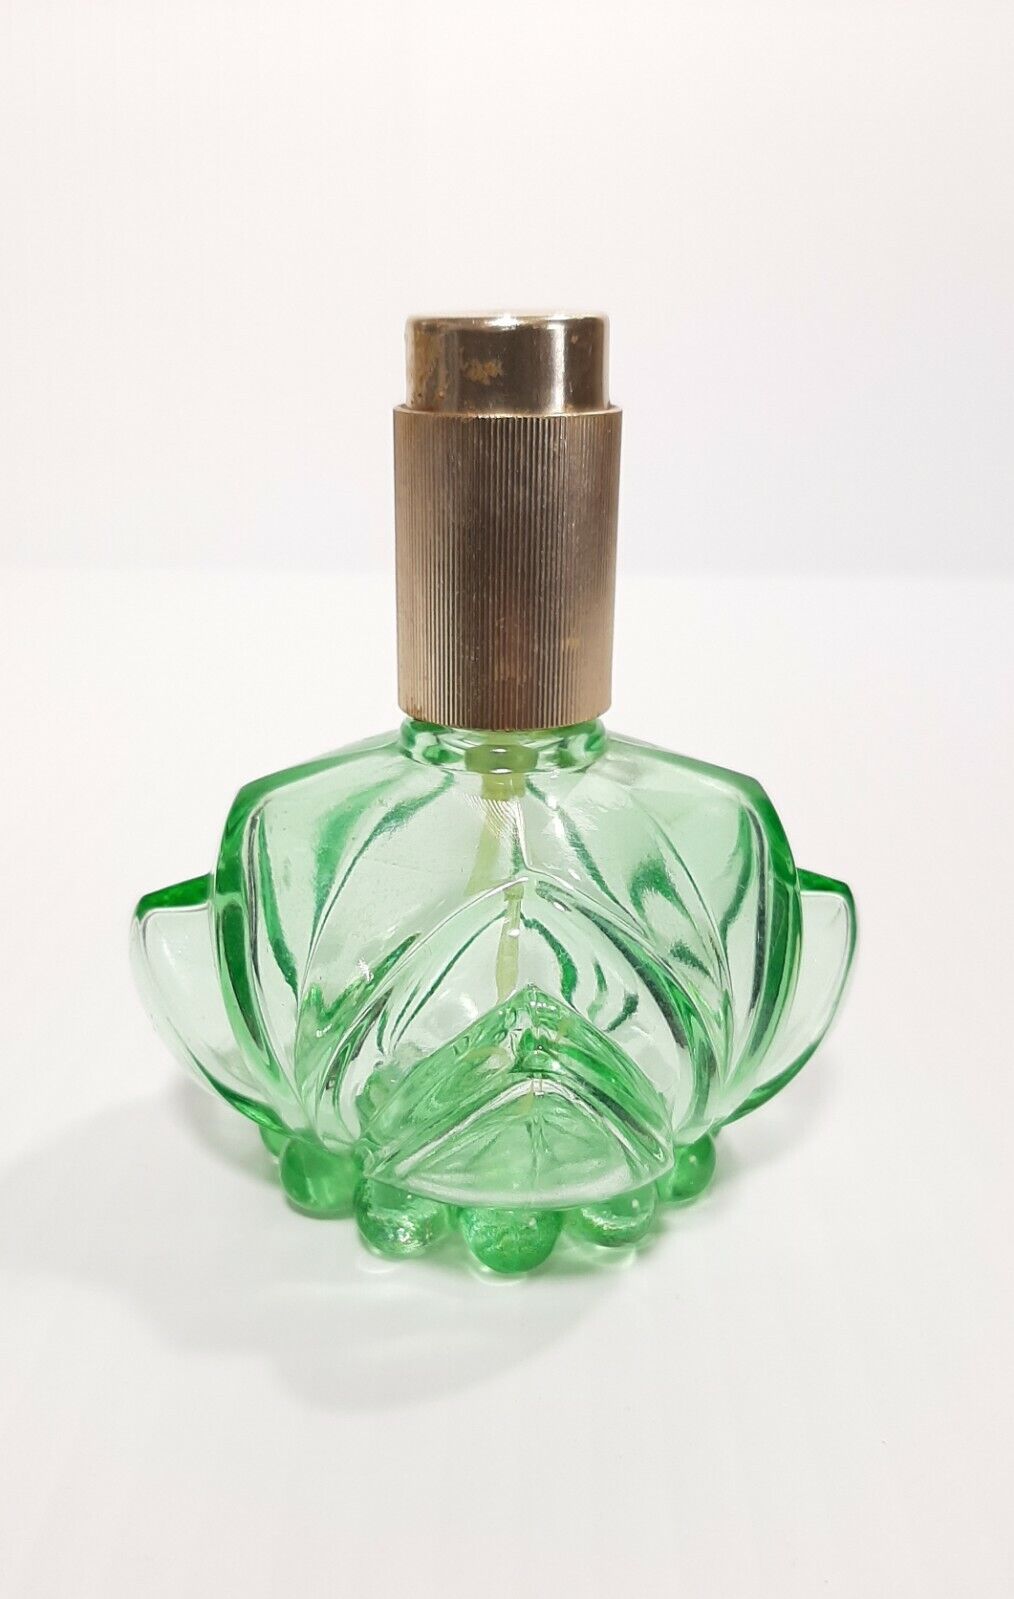 Vintage Green Glass Refillable Perfume Bottle_Cathedral Arches_Spain, Luxus